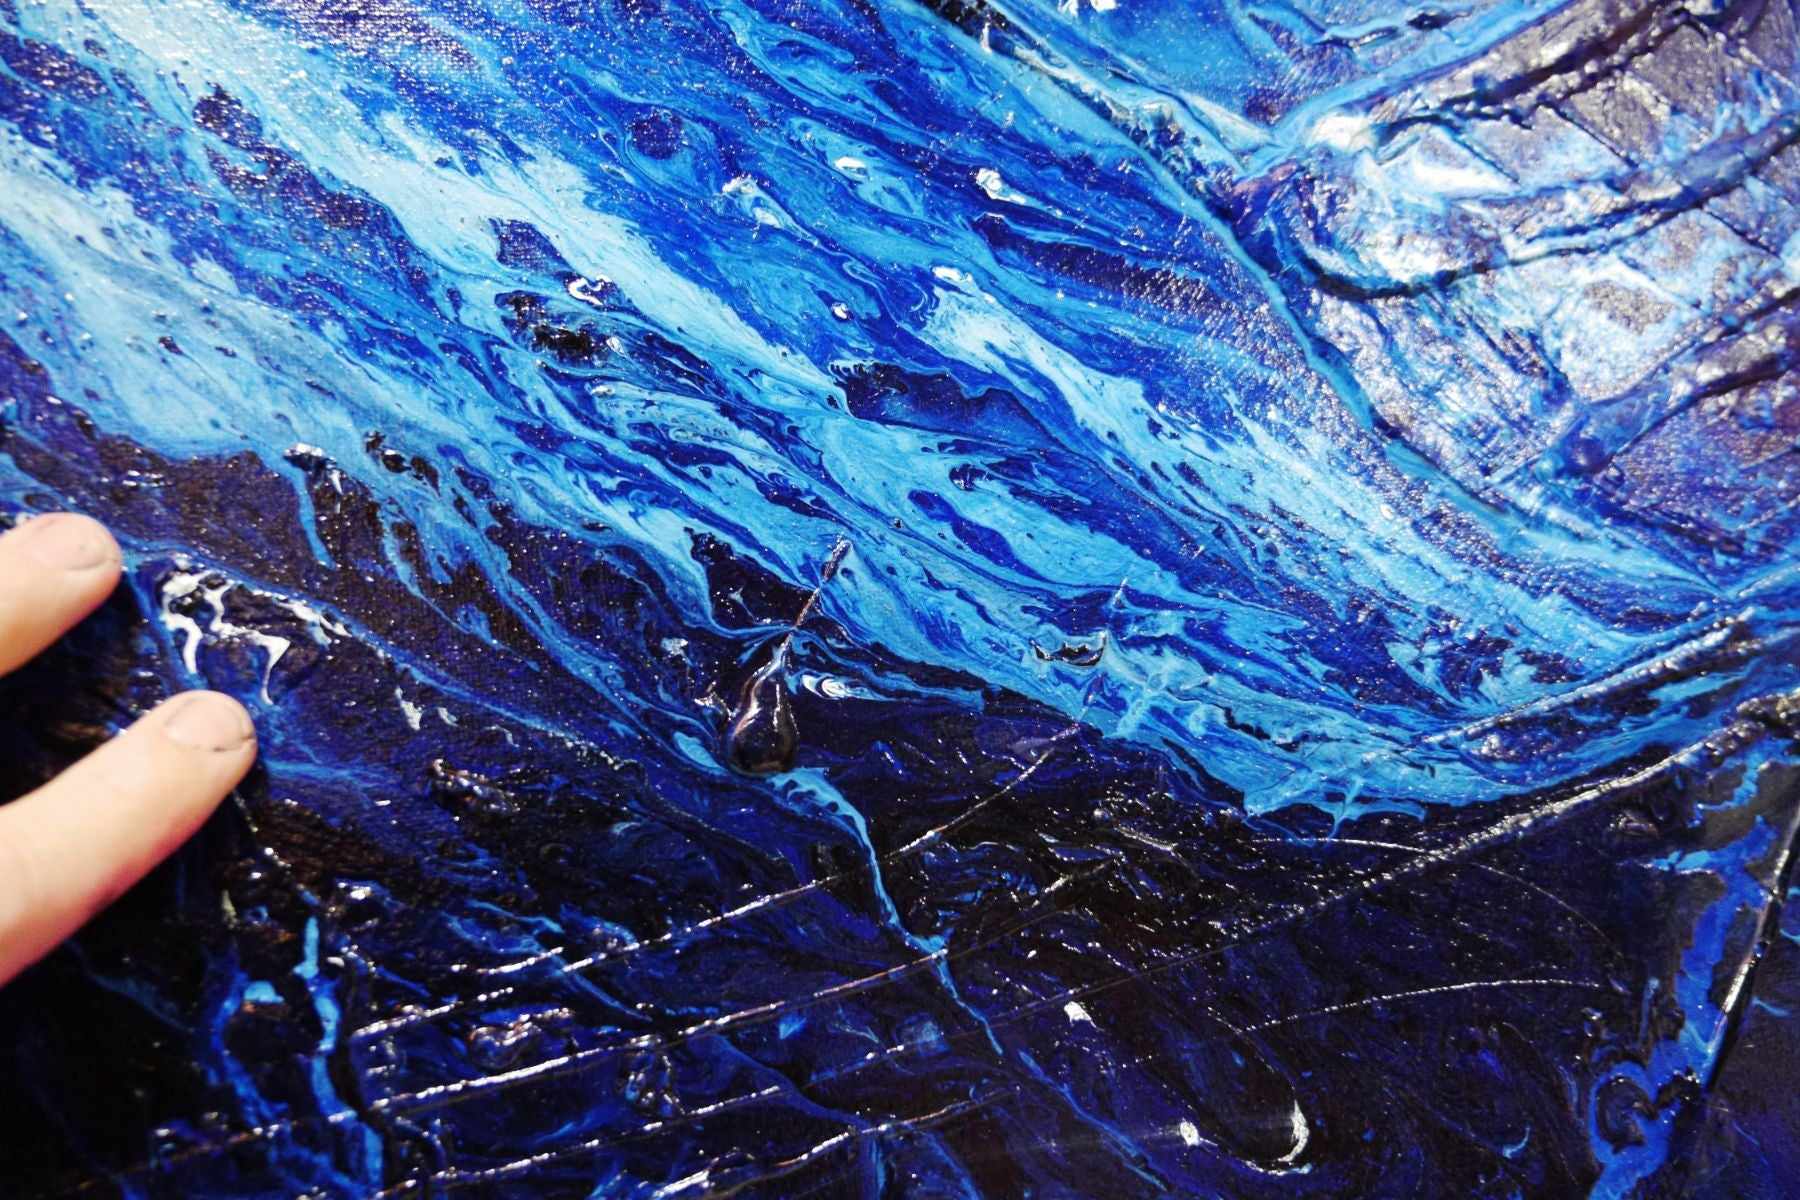 Iceland 240cm x 100cm Blue White Textured Abstract Painting (SOLD)-Abstract-[Franko]-[Artist]-[Australia]-[Painting]-Franklin Art Studio